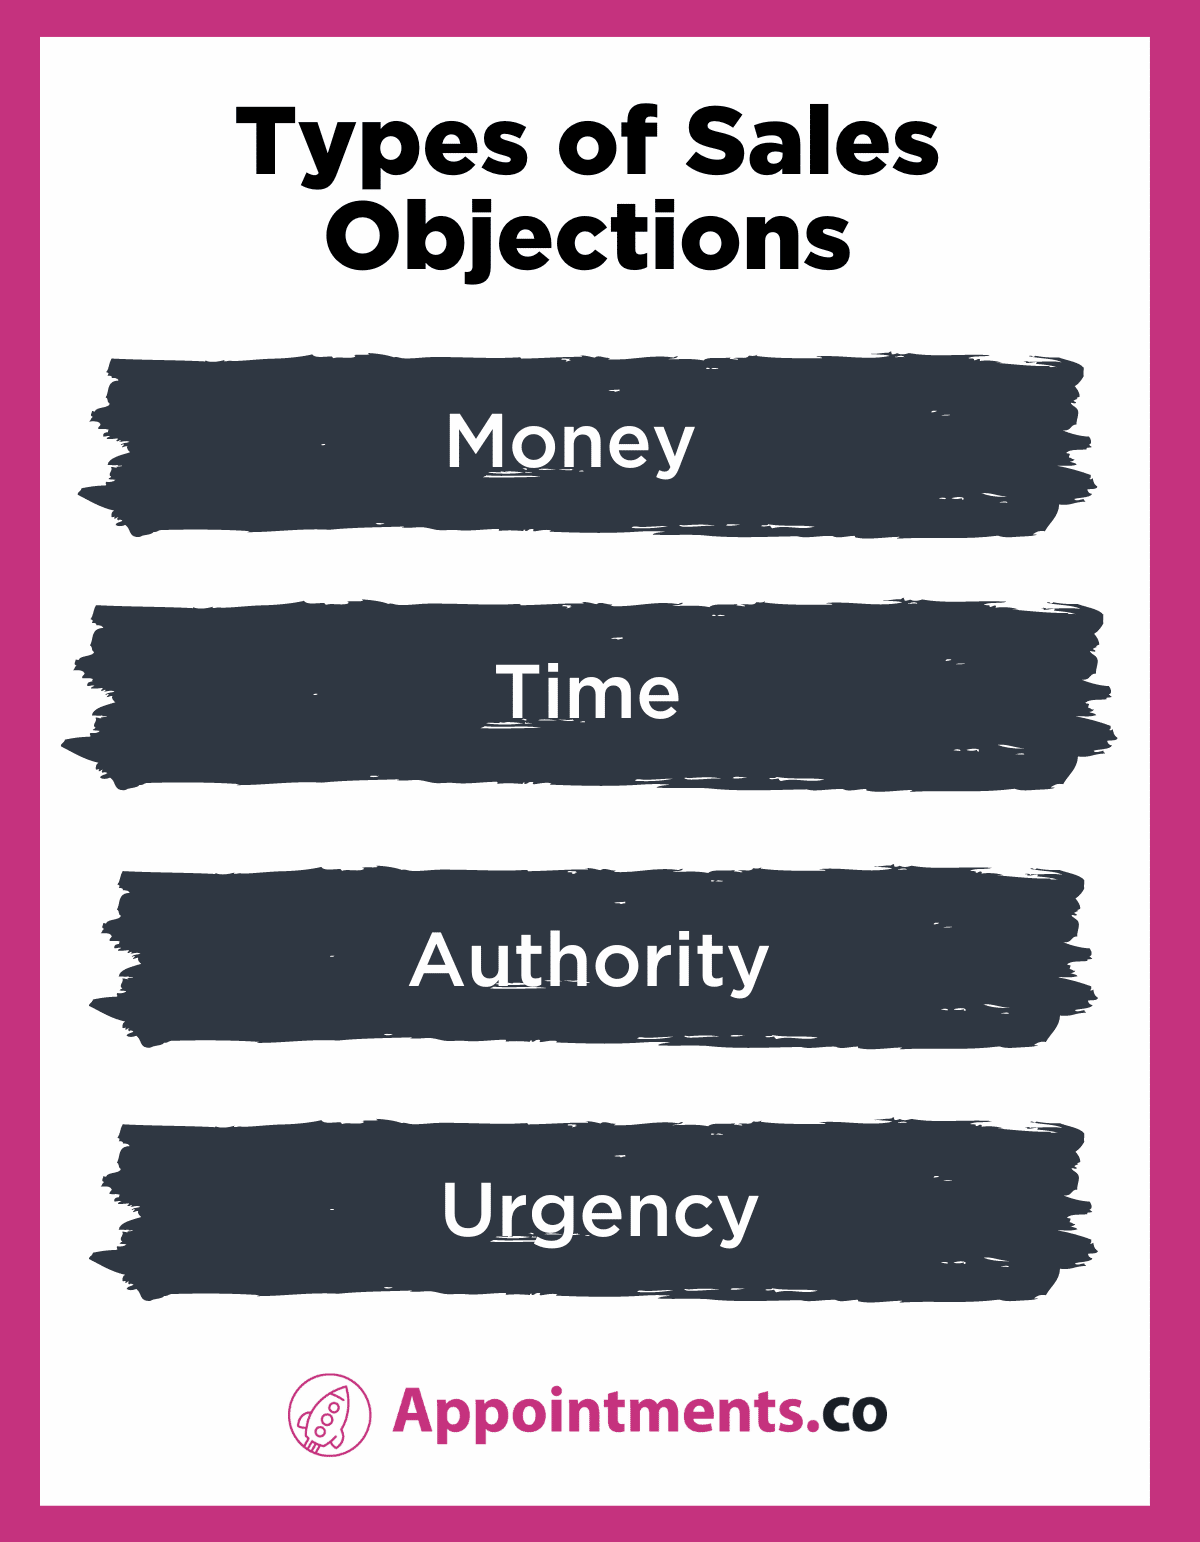 How to Overcome Sales Objections - 4 Different Types